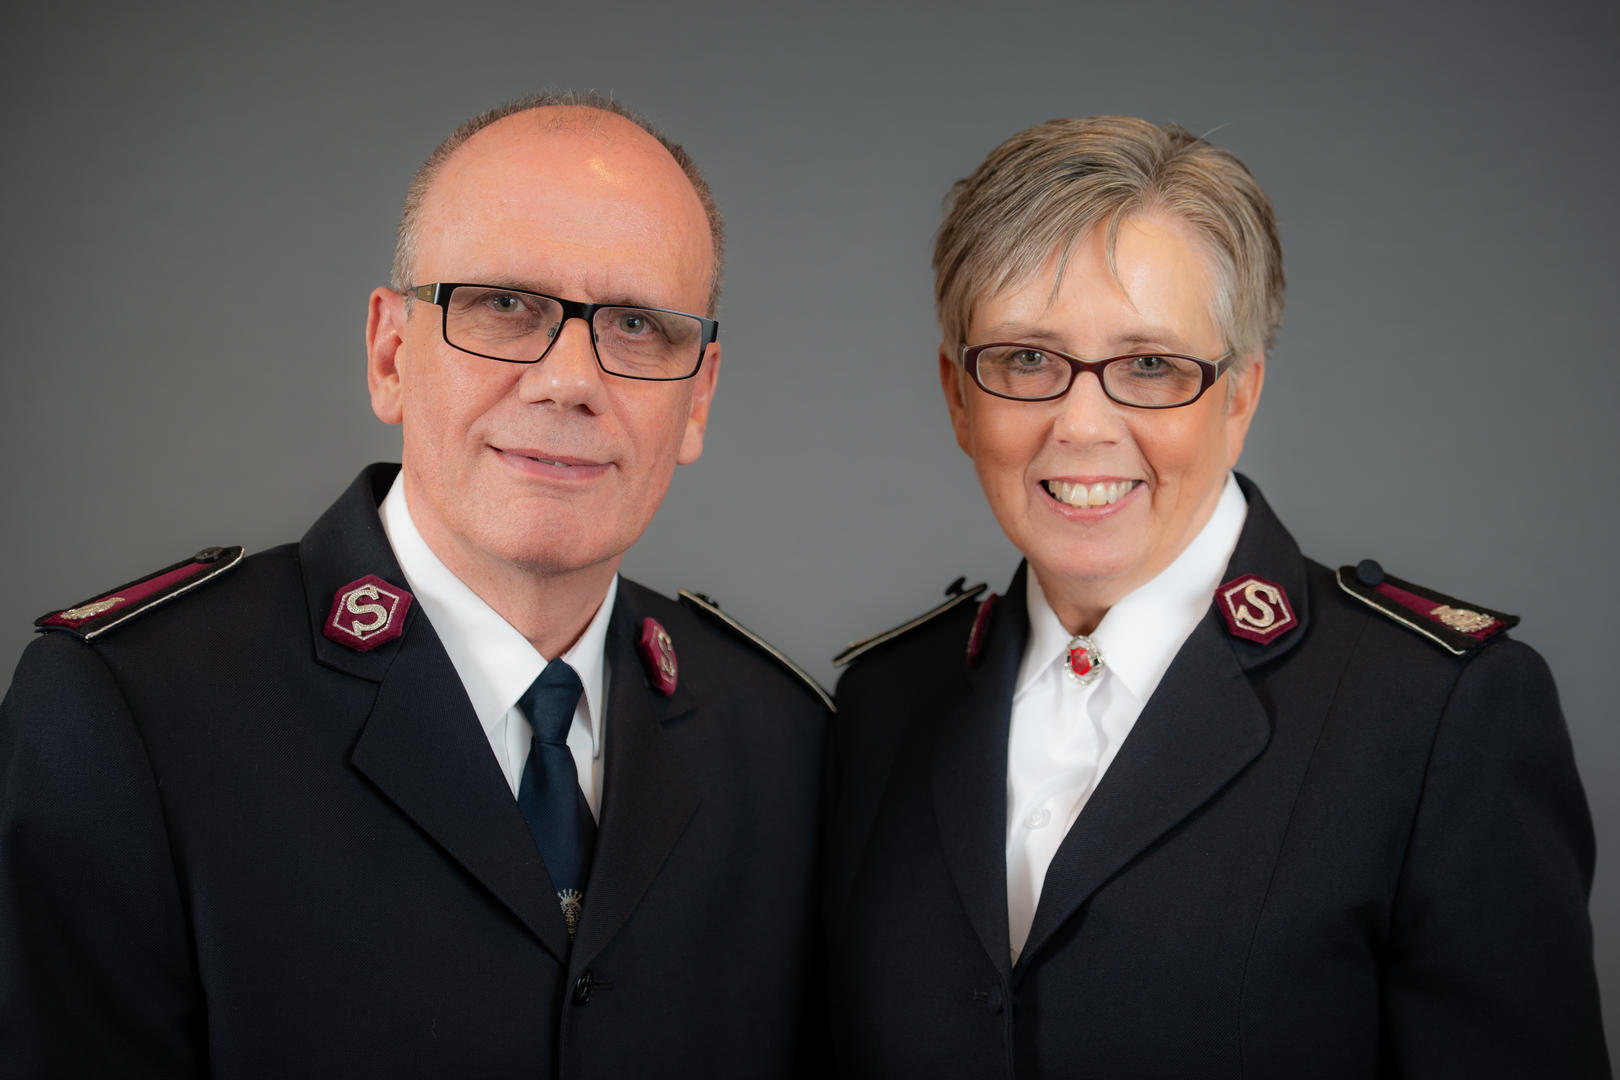 A photo of Commissioners Anthony and Gillian Cotterill.